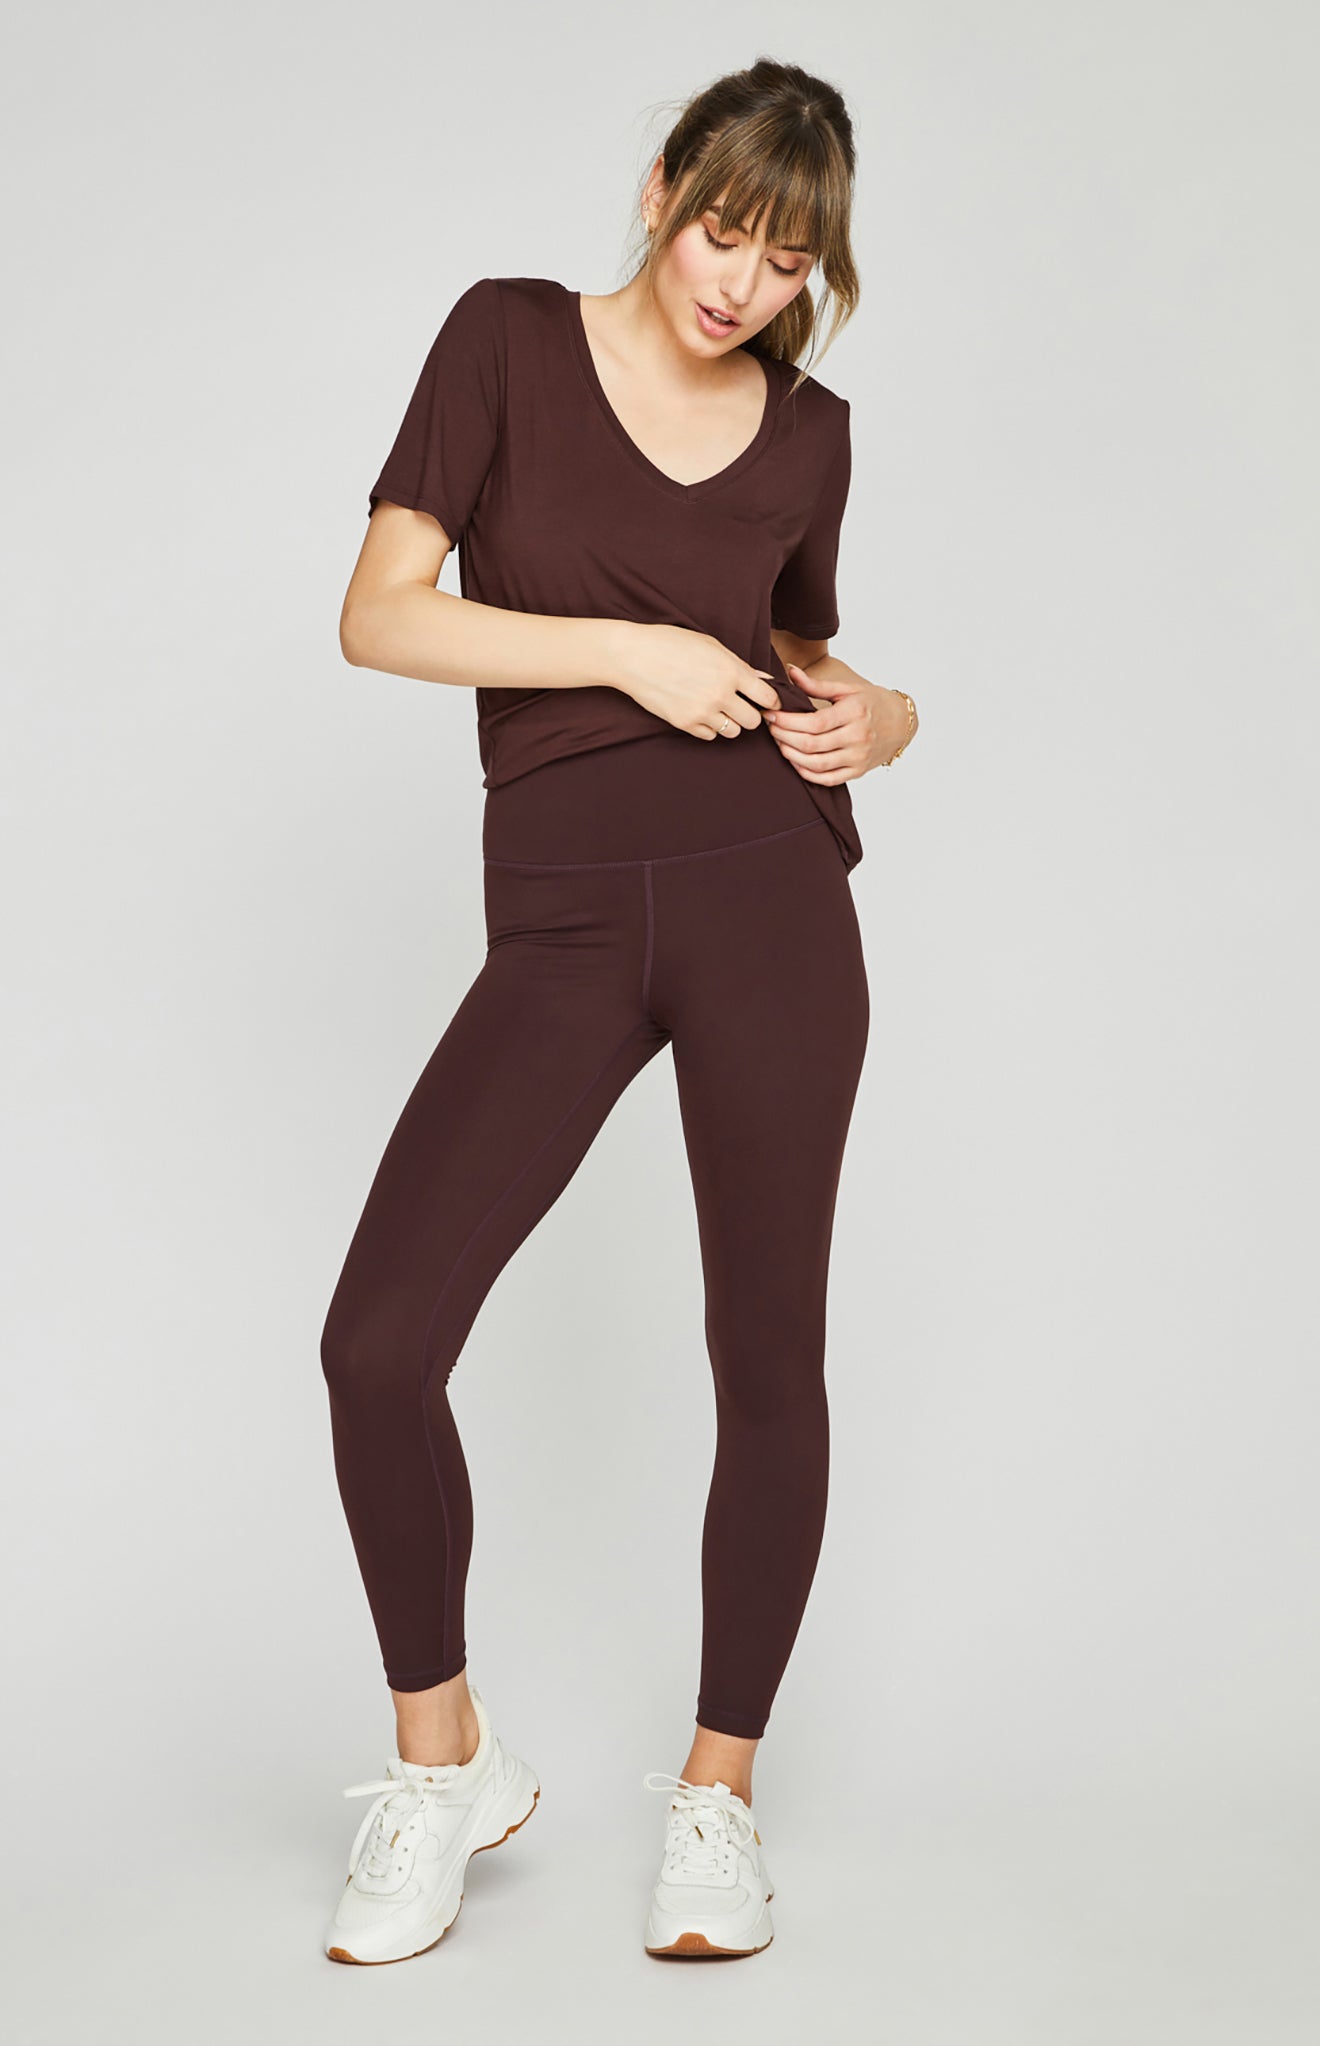 Gentle Fawn Oracle Faux Leather Leggings - Starlet